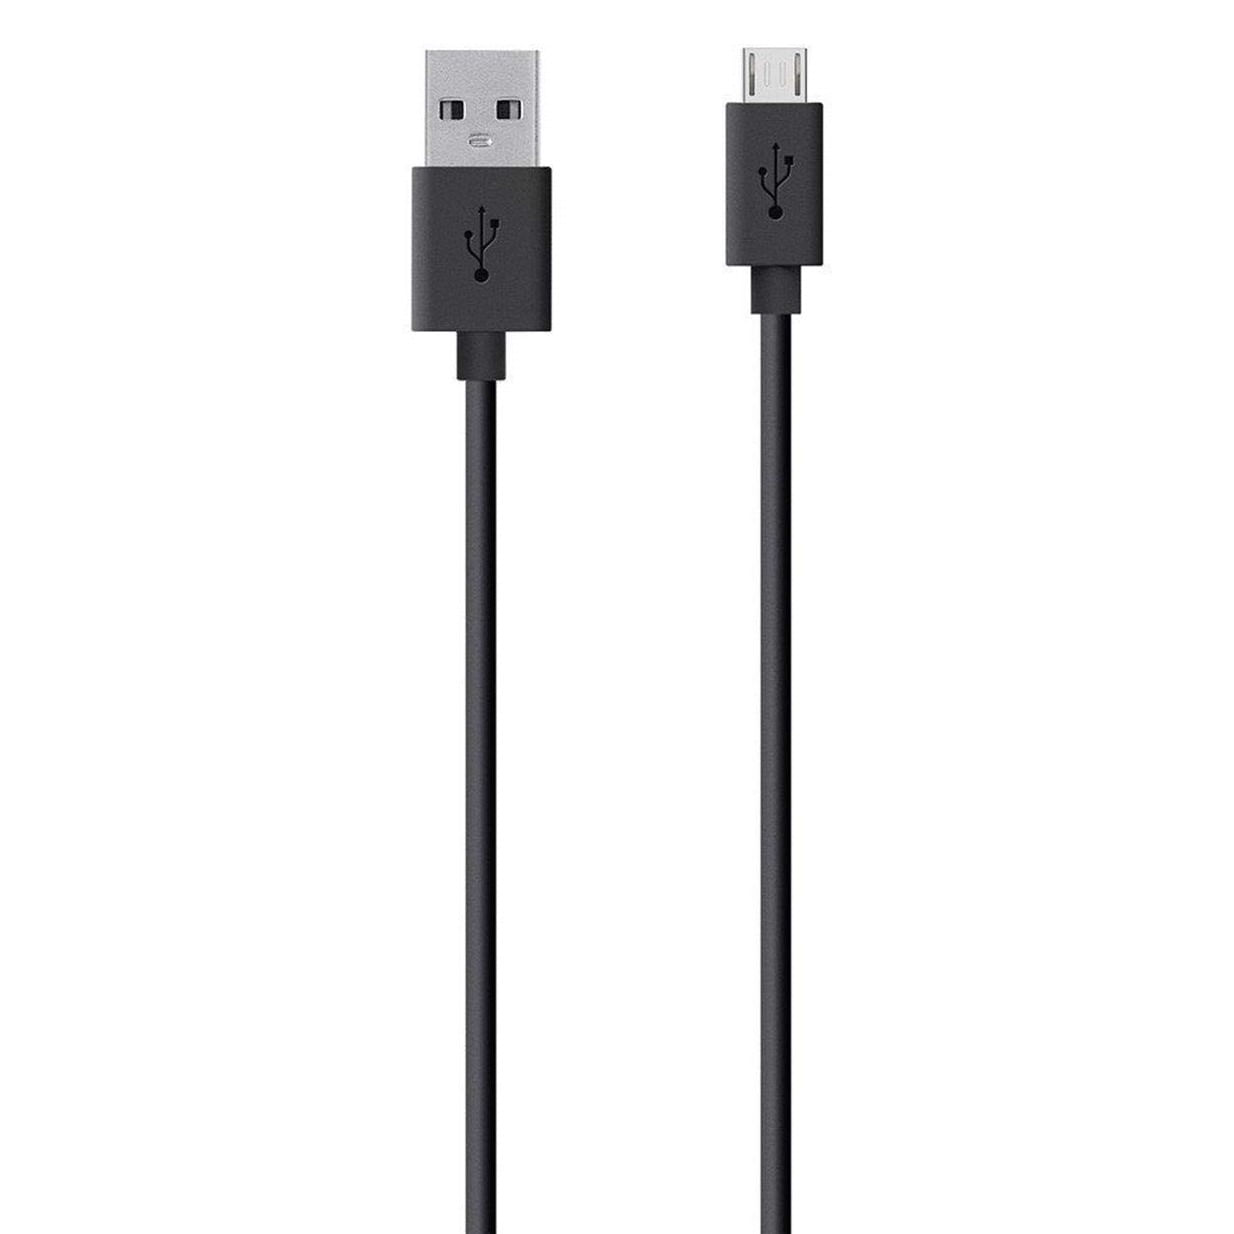 Cable Belkin MIXIT USB Original Android Compatible con Samsung Sony 4 PIN Tipo Negro - F2CU012BT04